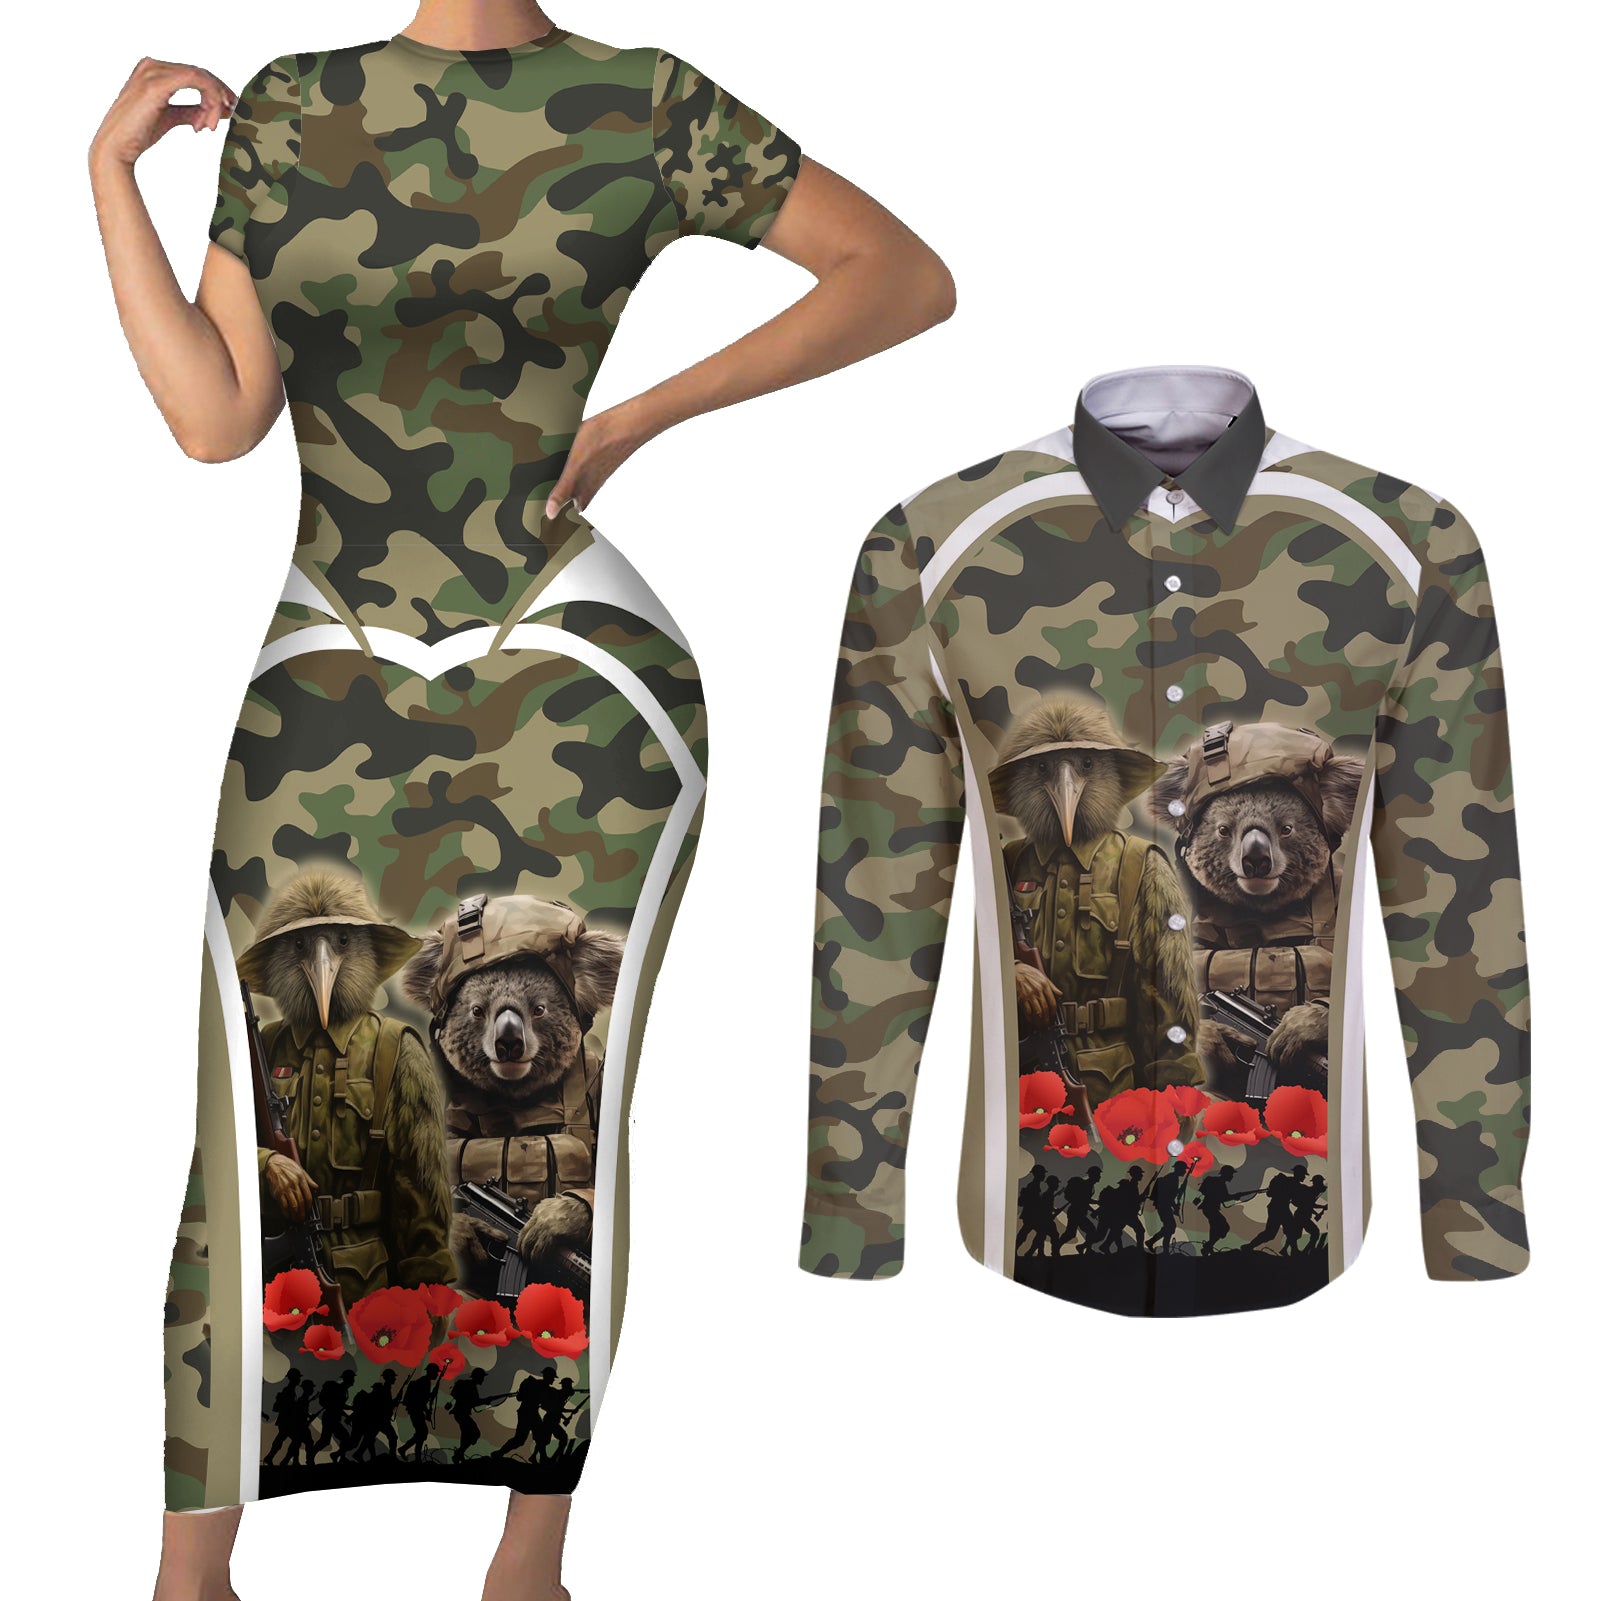 New Zealand and Australia ANZAC Day Couples Matching Short Sleeve Bodycon Dress and Long Sleeve Button Shirt Koala and Kiwi Bird Soldier Gallipoli Camouflage Style LT03 Green - Polynesian Pride